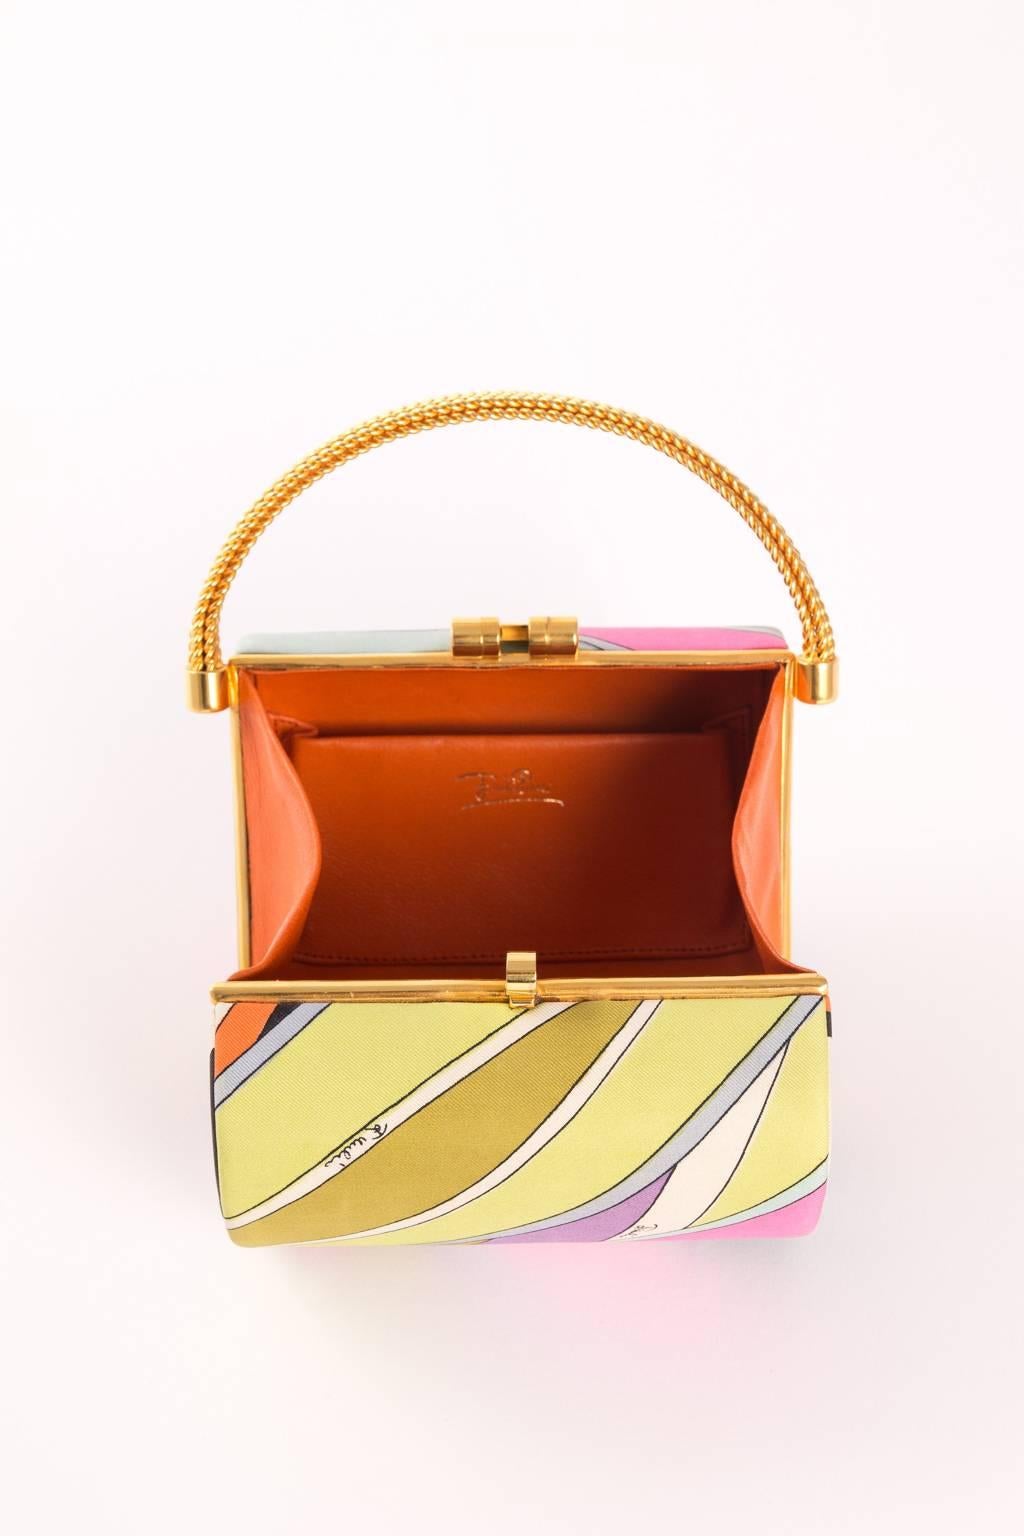 funky finders has this iconic handbag from the house of emilio pucci. features a signature, signed, silk-blend midcentury print. 3-tier decorative brass handle & 4 brass feet are noteworthy. beautifully designed brass closure. the 'box' bag remains